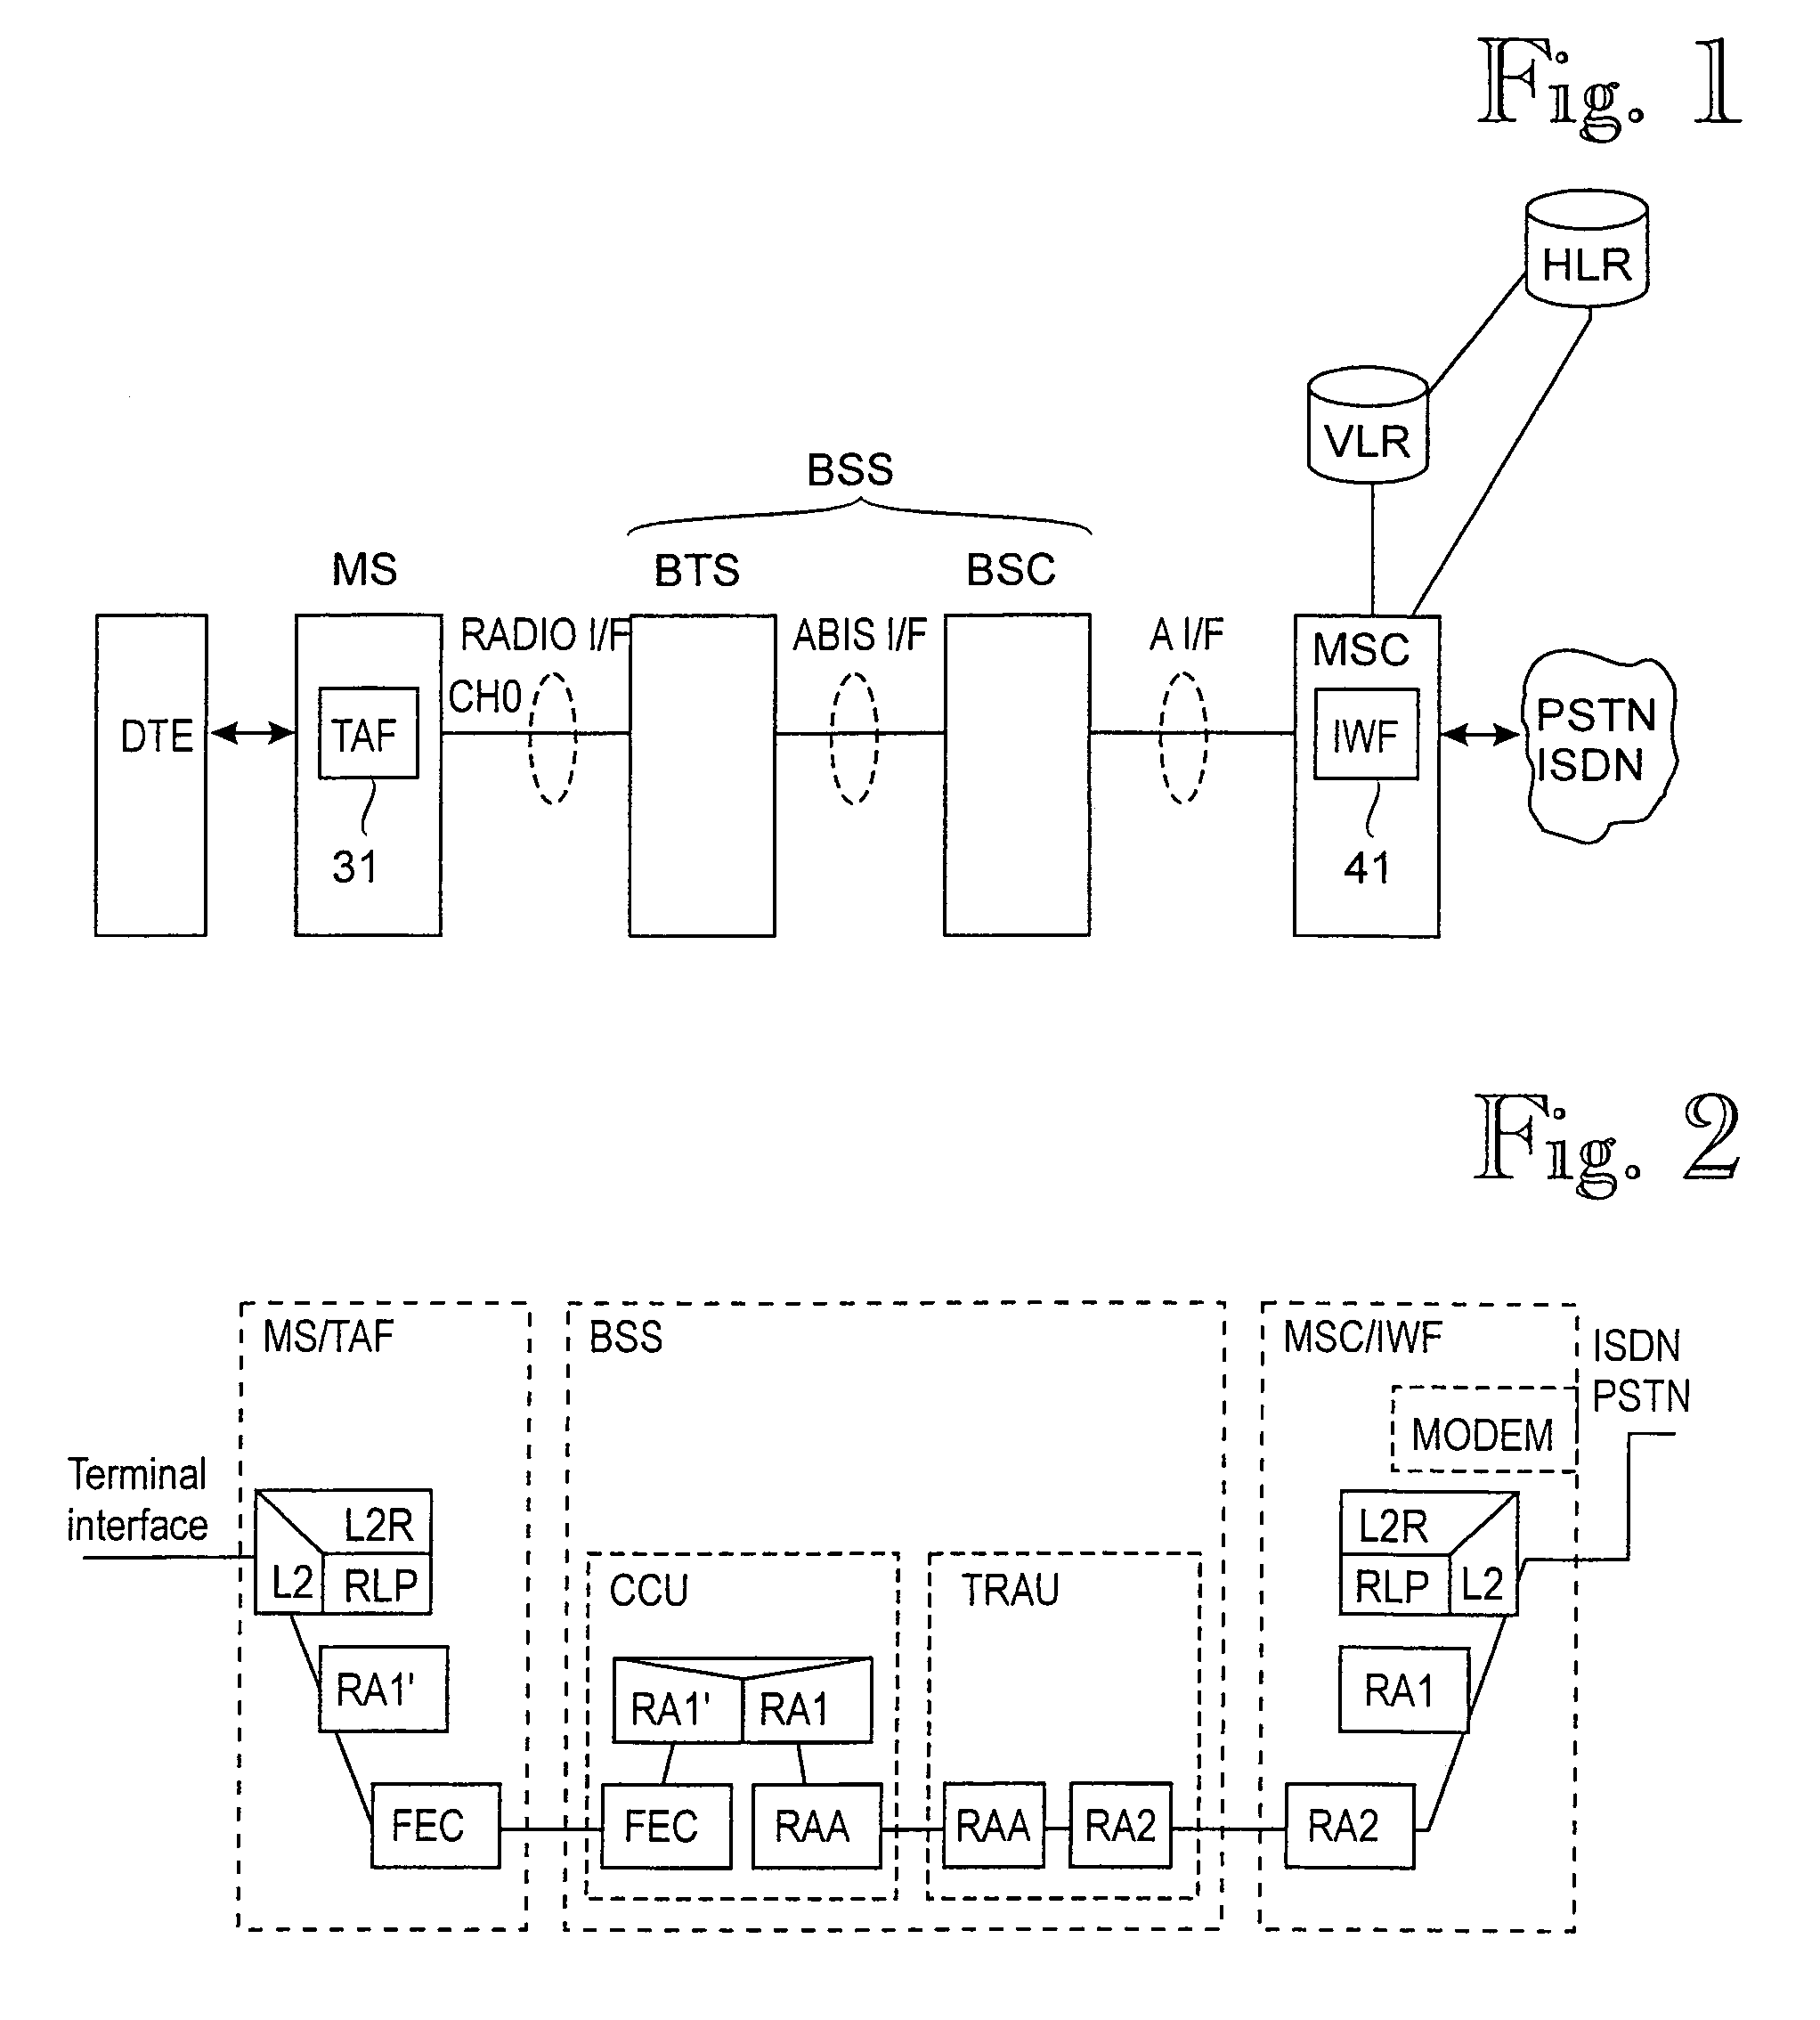 Implementation of multiple simultaneous calls in a mobile communication system